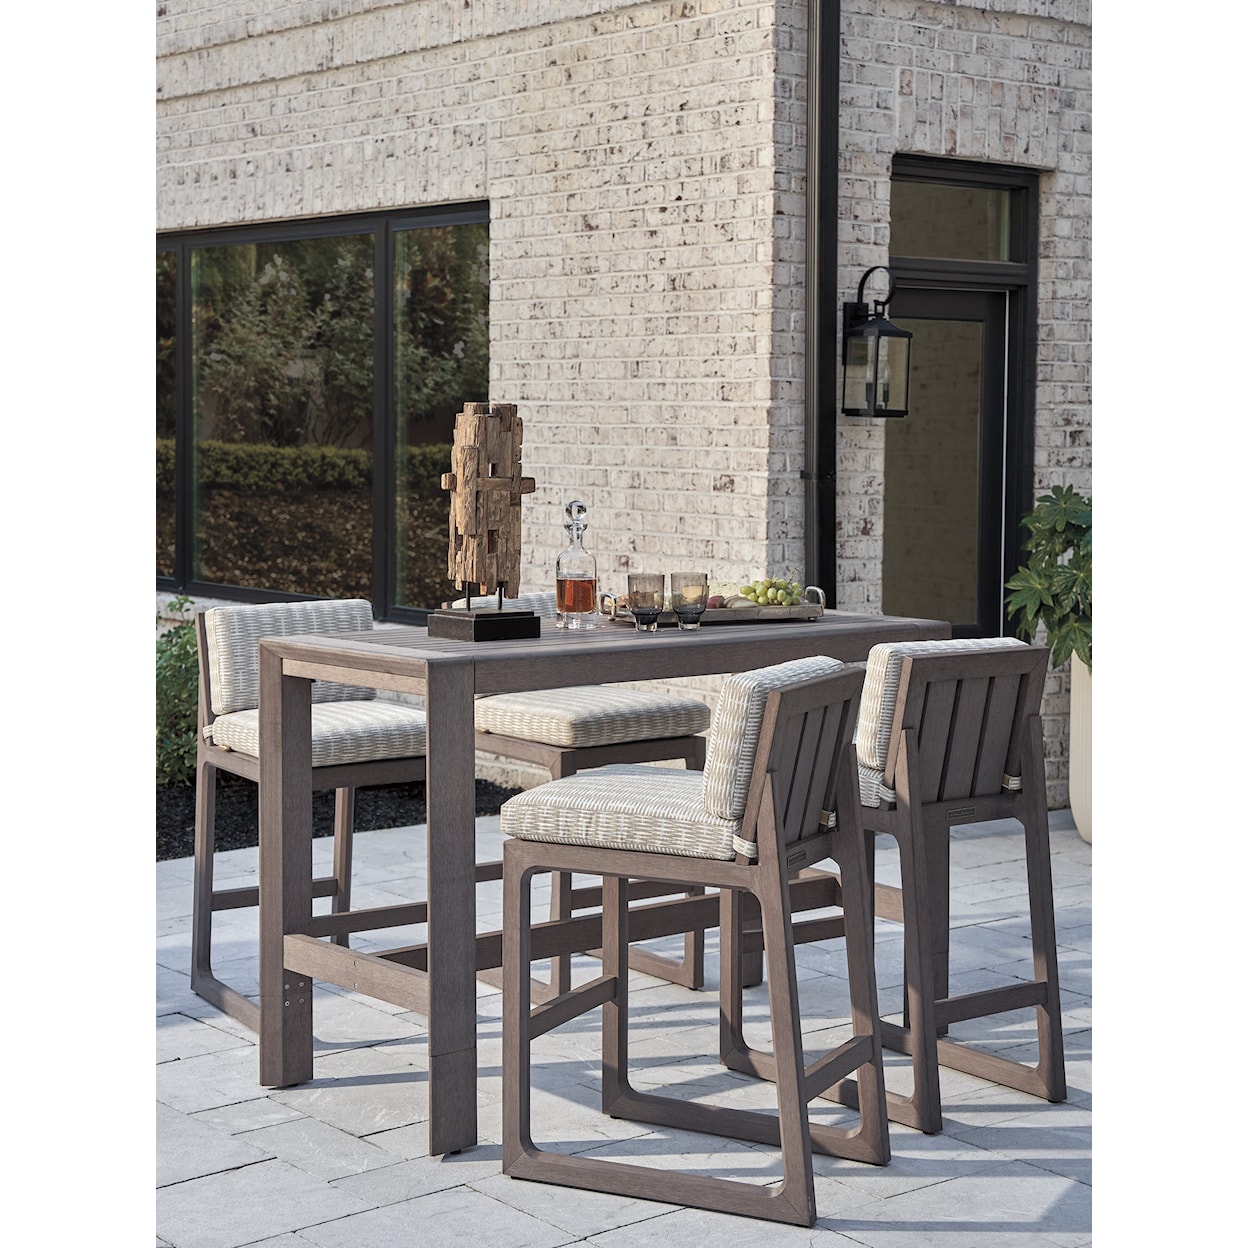 Tommy Bahama Outdoor Living Mozambique 5-Piece Outdoor Dining Set with Bar Stools